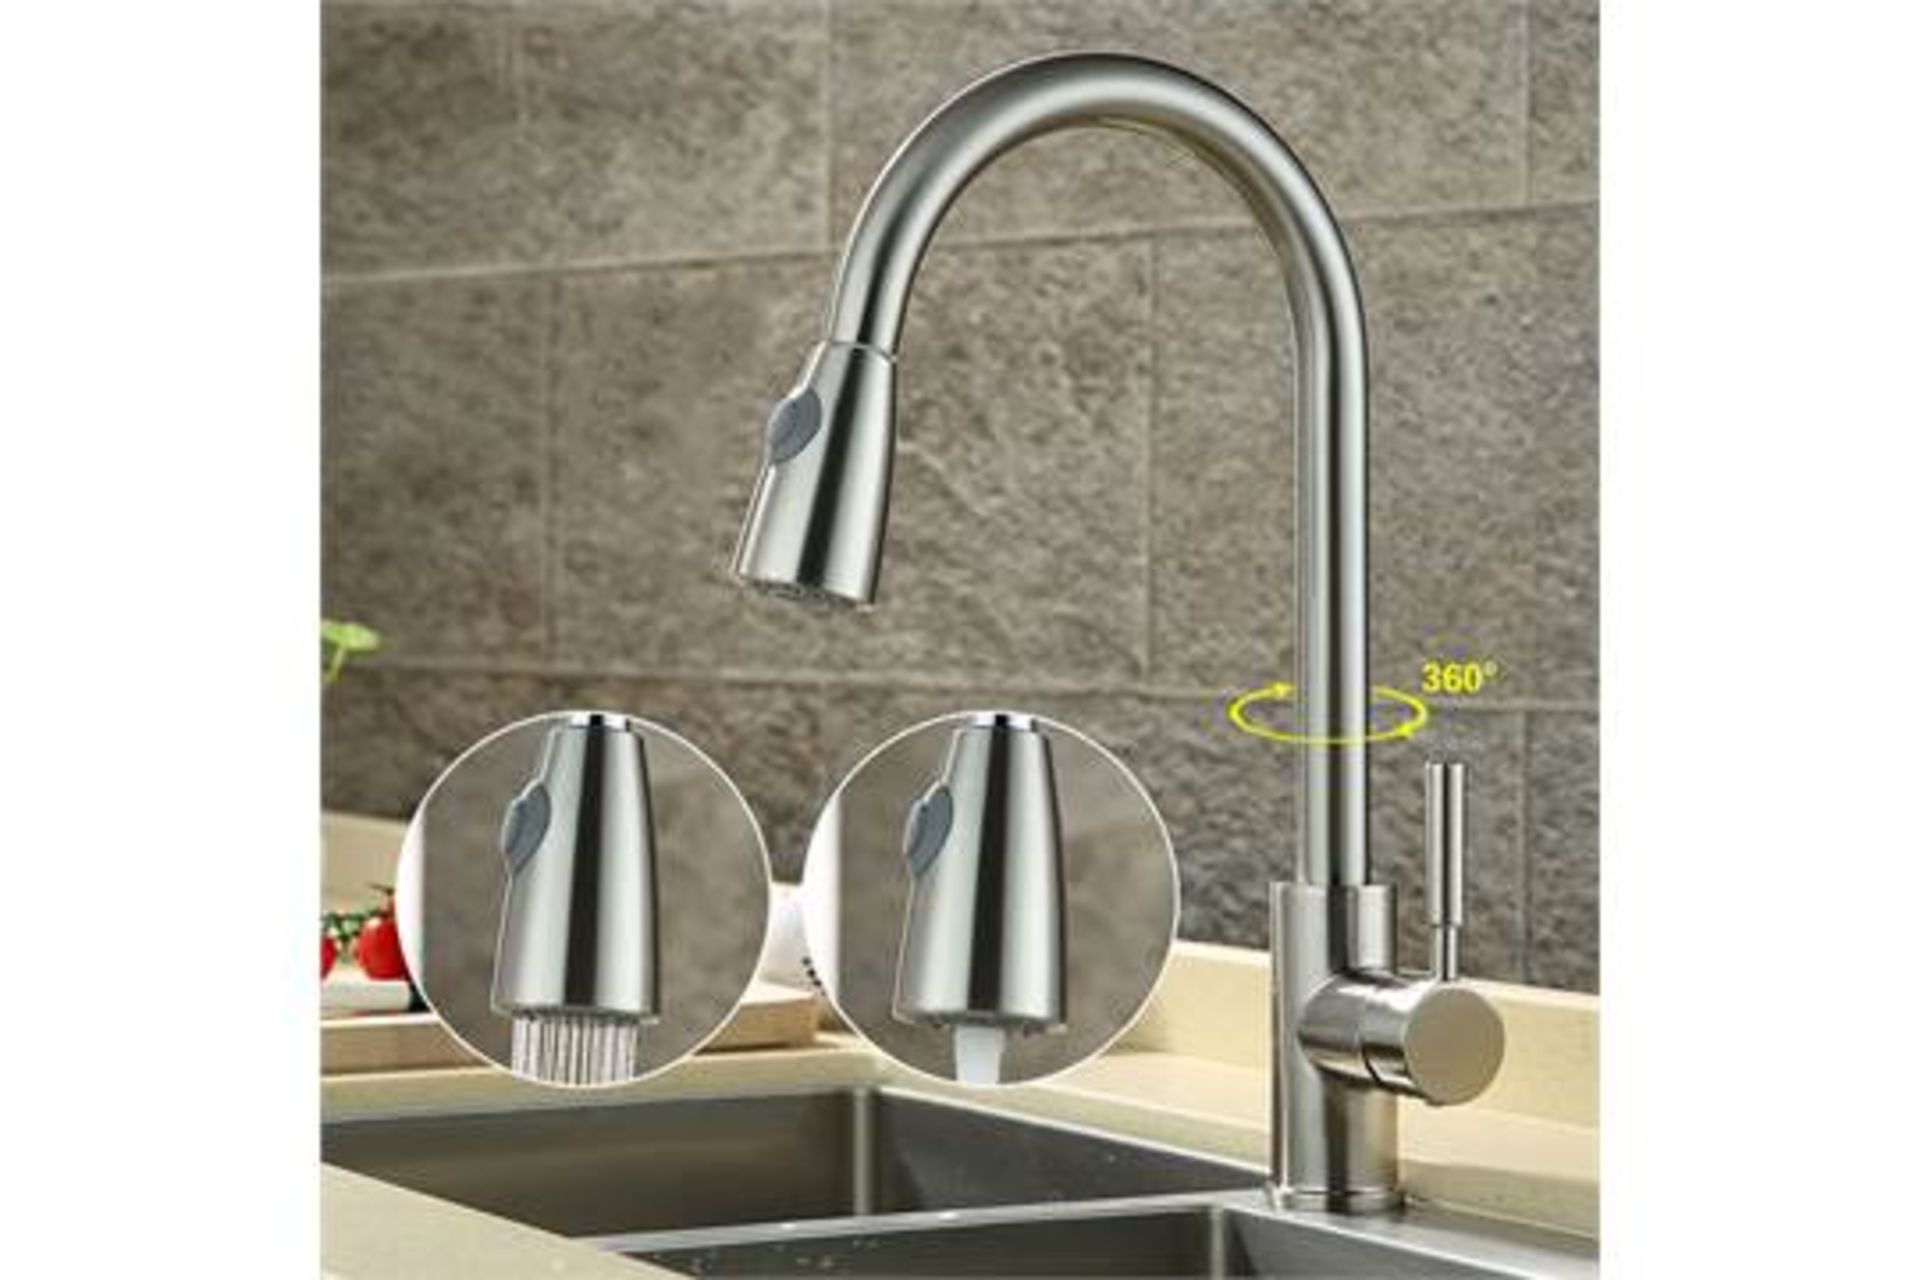 (O292) Della Chrome Plated Kitchen Mixer Tap - Pull Out Spray. RRP £253.98. Contemporary with an - Image 3 of 3